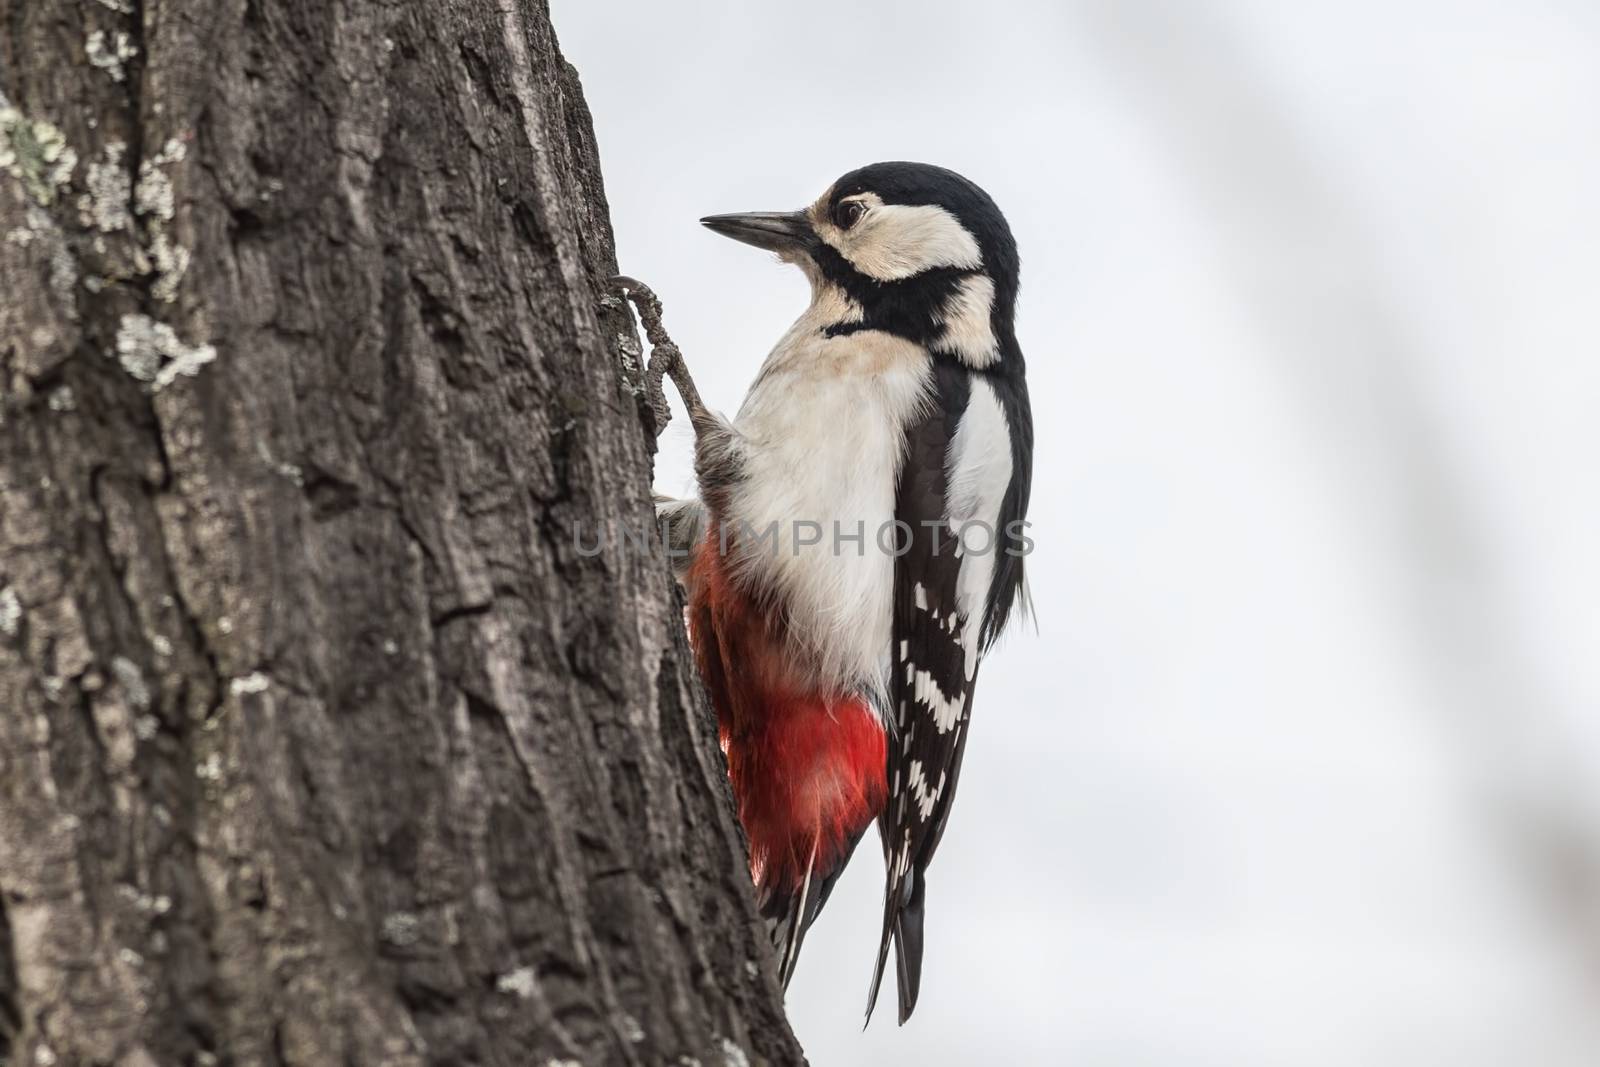 Female Great spotted woodpecker sitting on a tree